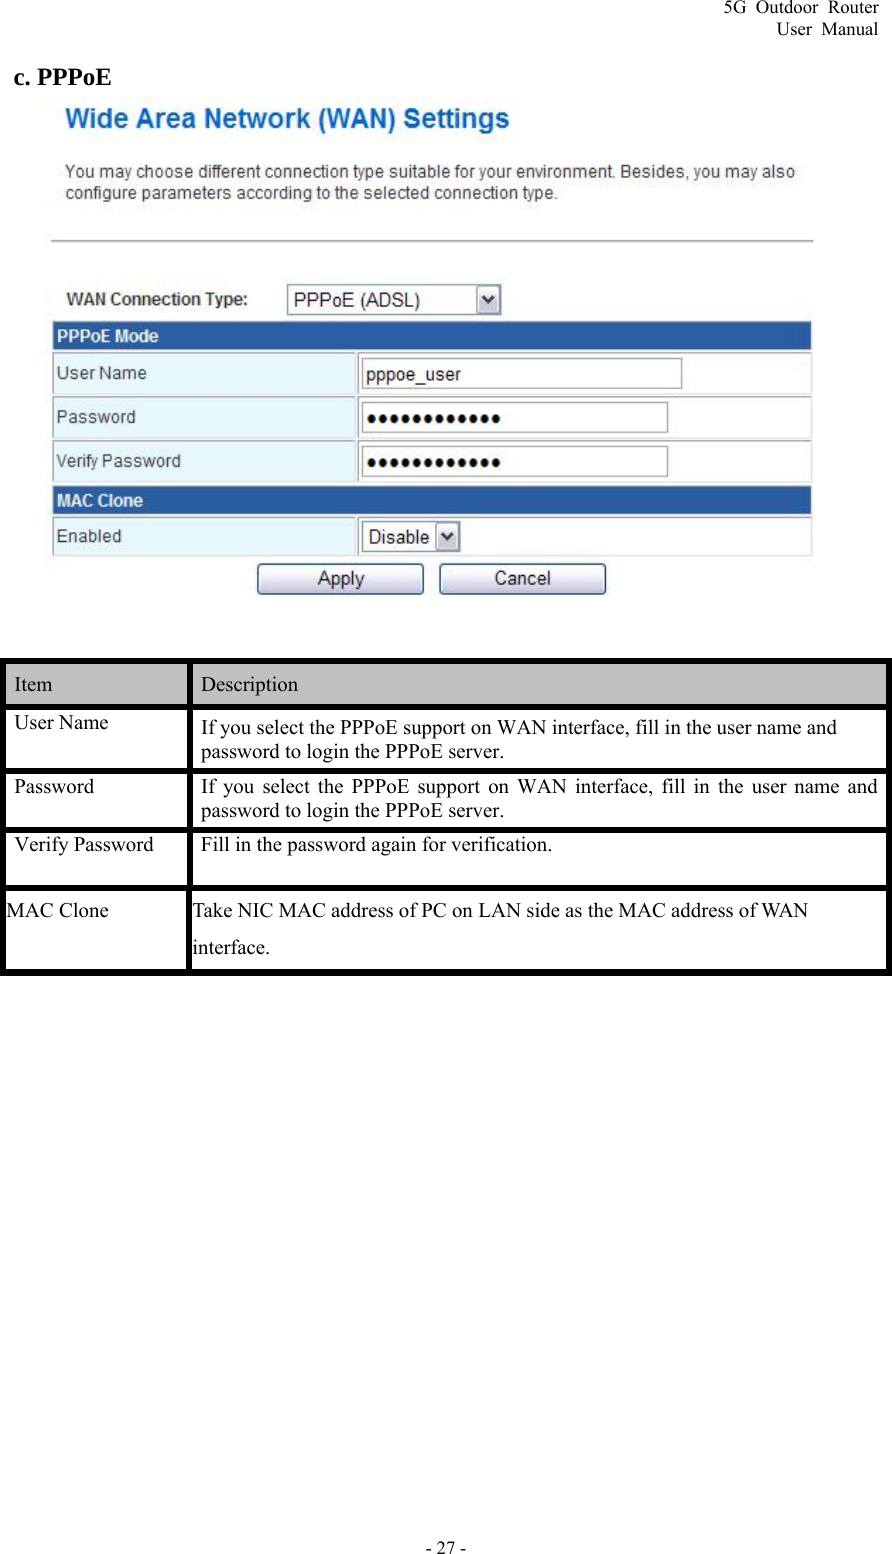 5G Outdoor Router User Manual - 27 - c. PPPoE     Item   Description  User Name  If you select the PPPoE support on WAN interface, fill in the user name and password to login the PPPoE server.   Password  If you select the PPPoE support on WAN interface, fill in the user name and password to login the PPPoE server. Verify Password  Fill in the password again for verification. MAC Clone  Take NIC MAC address of PC on LAN side as the MAC address of WAN interface.  